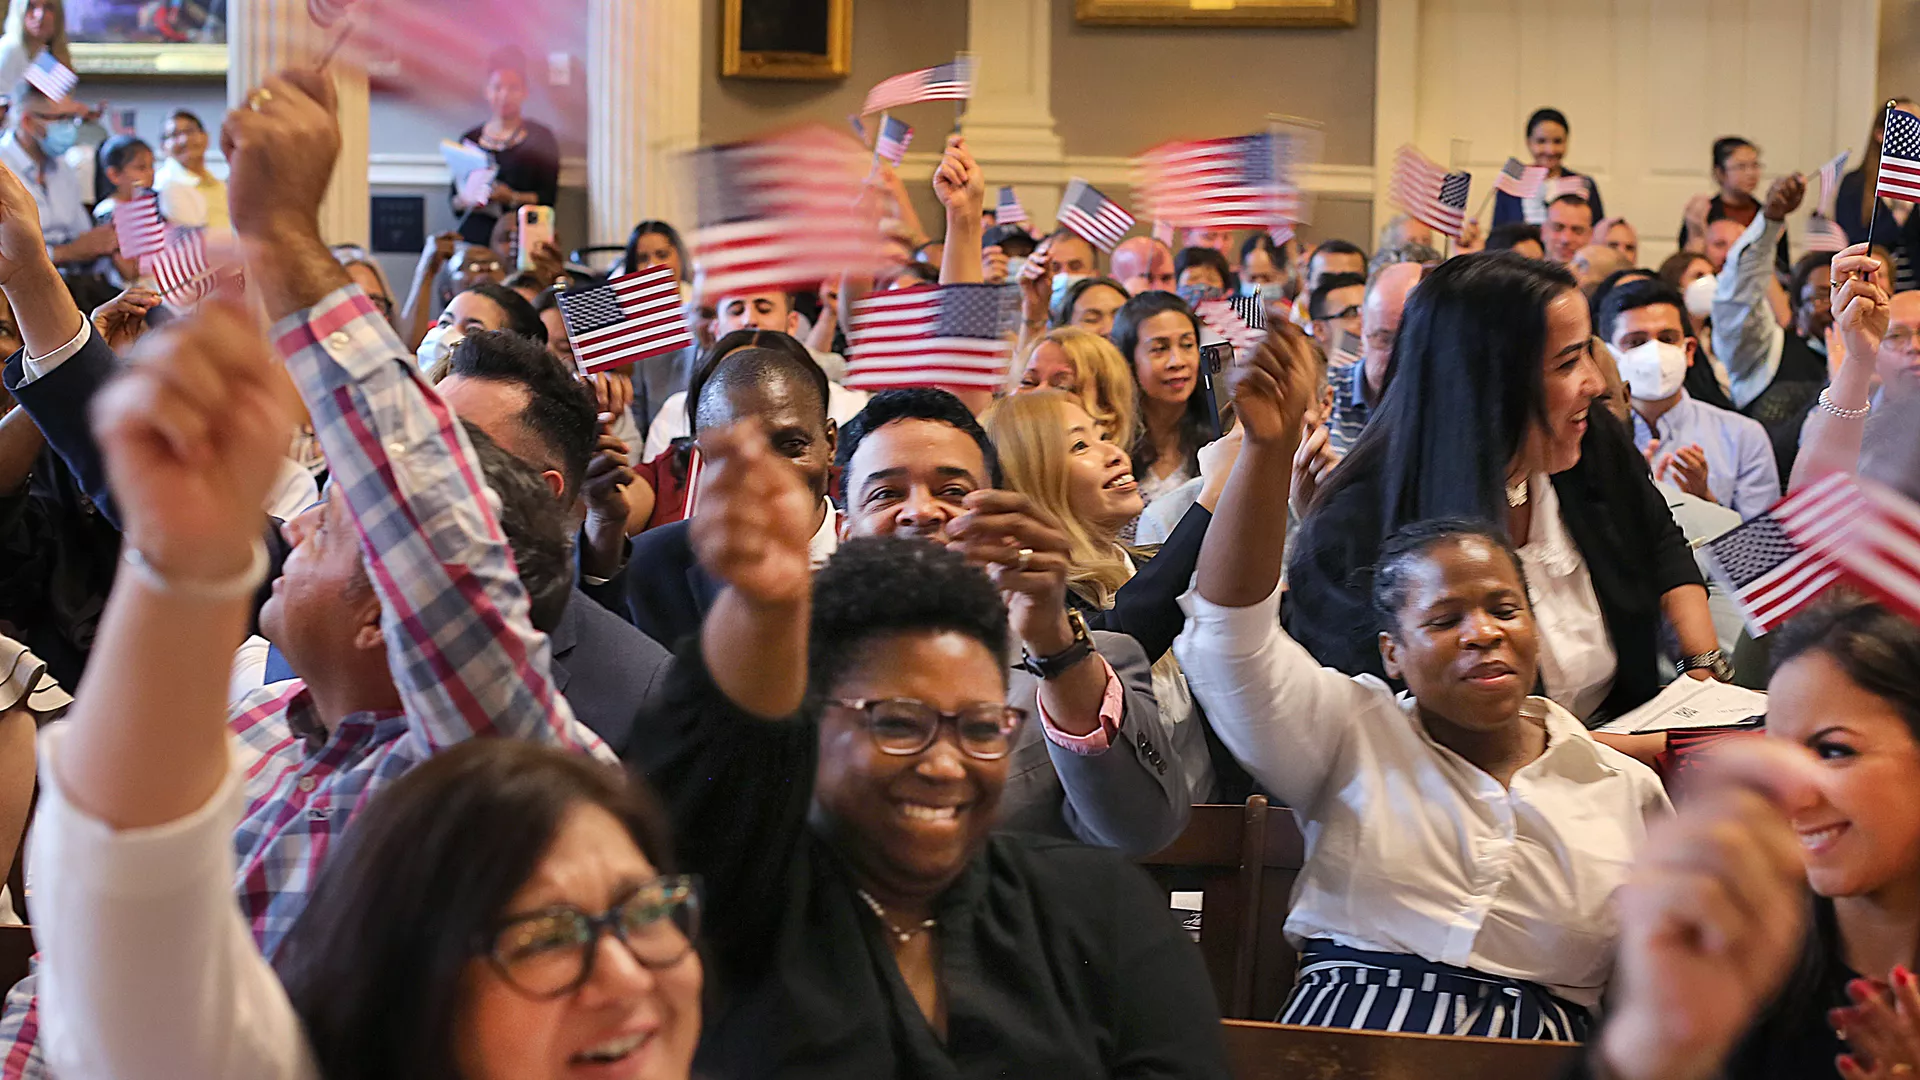 A group of people waving American flags.